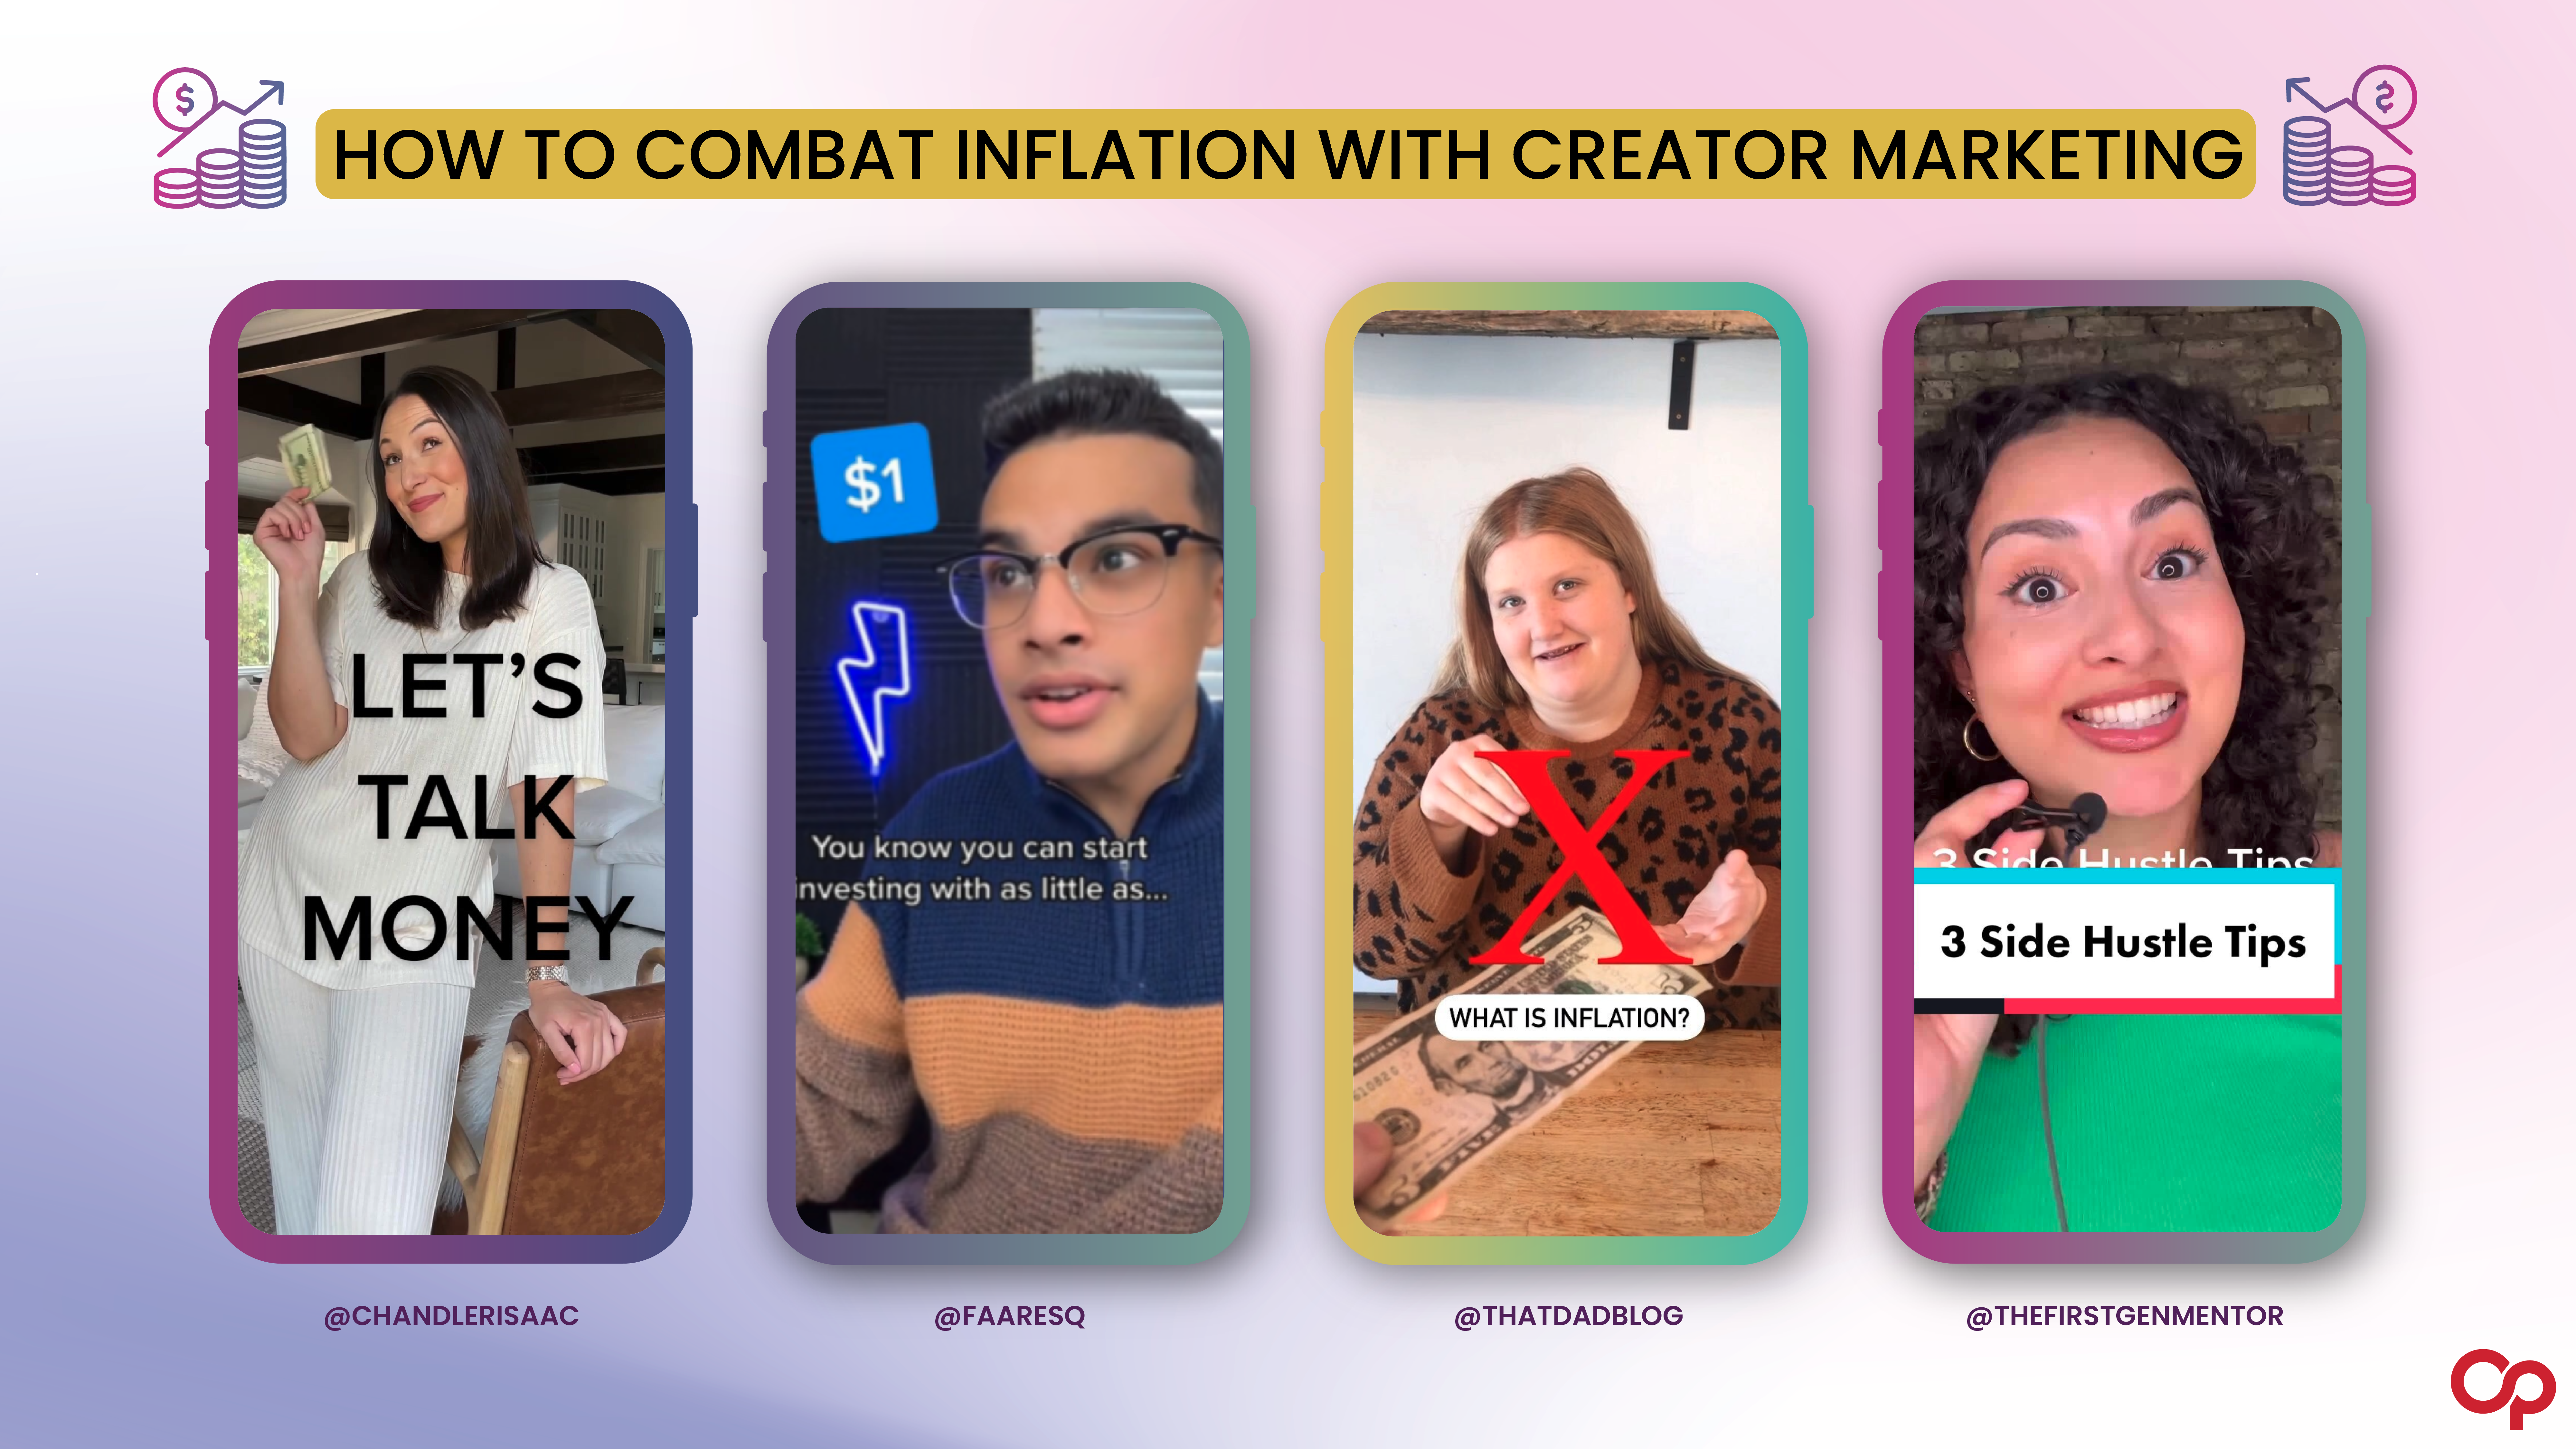 [REPORT] How to Combat Inflation with Creator Marketing